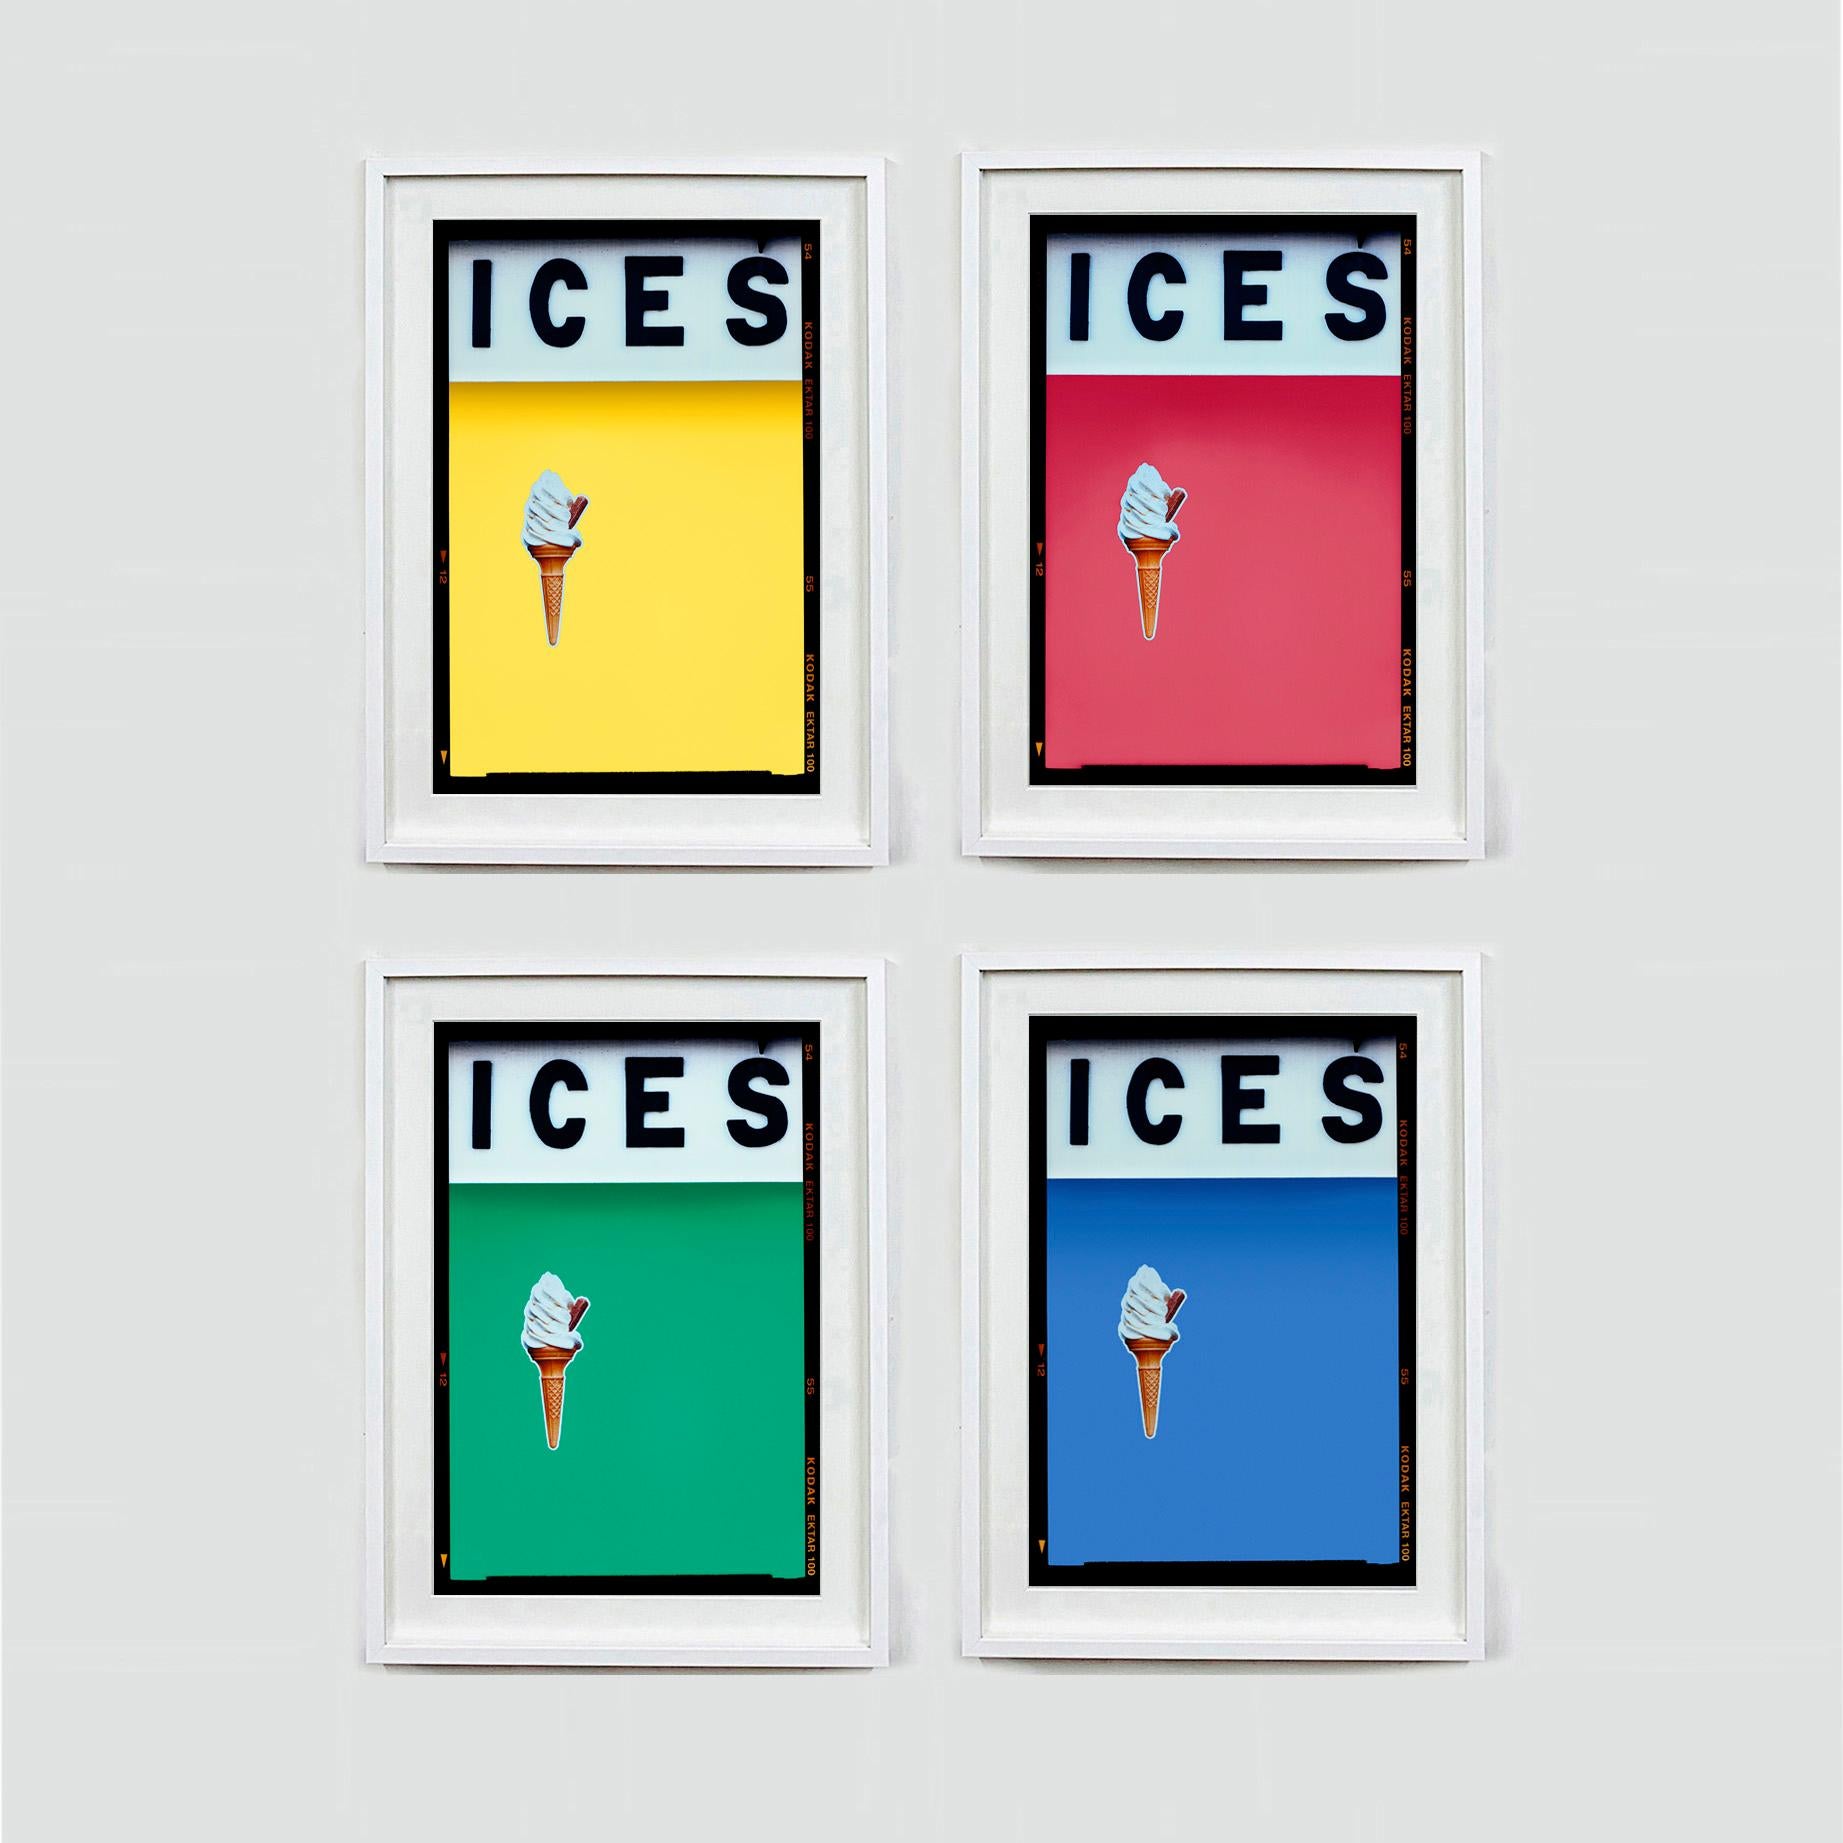 ICES - Four Framed Artworks, Photographs by Richard Heeps. 
Featured here Sherbet Yellow, Coral Pink , Viridian Green, Baby Blue. 
Get in touch to request other sizes or color combinations.

Each artwork measures 27.5" x 21.5" Framed in a Choice of